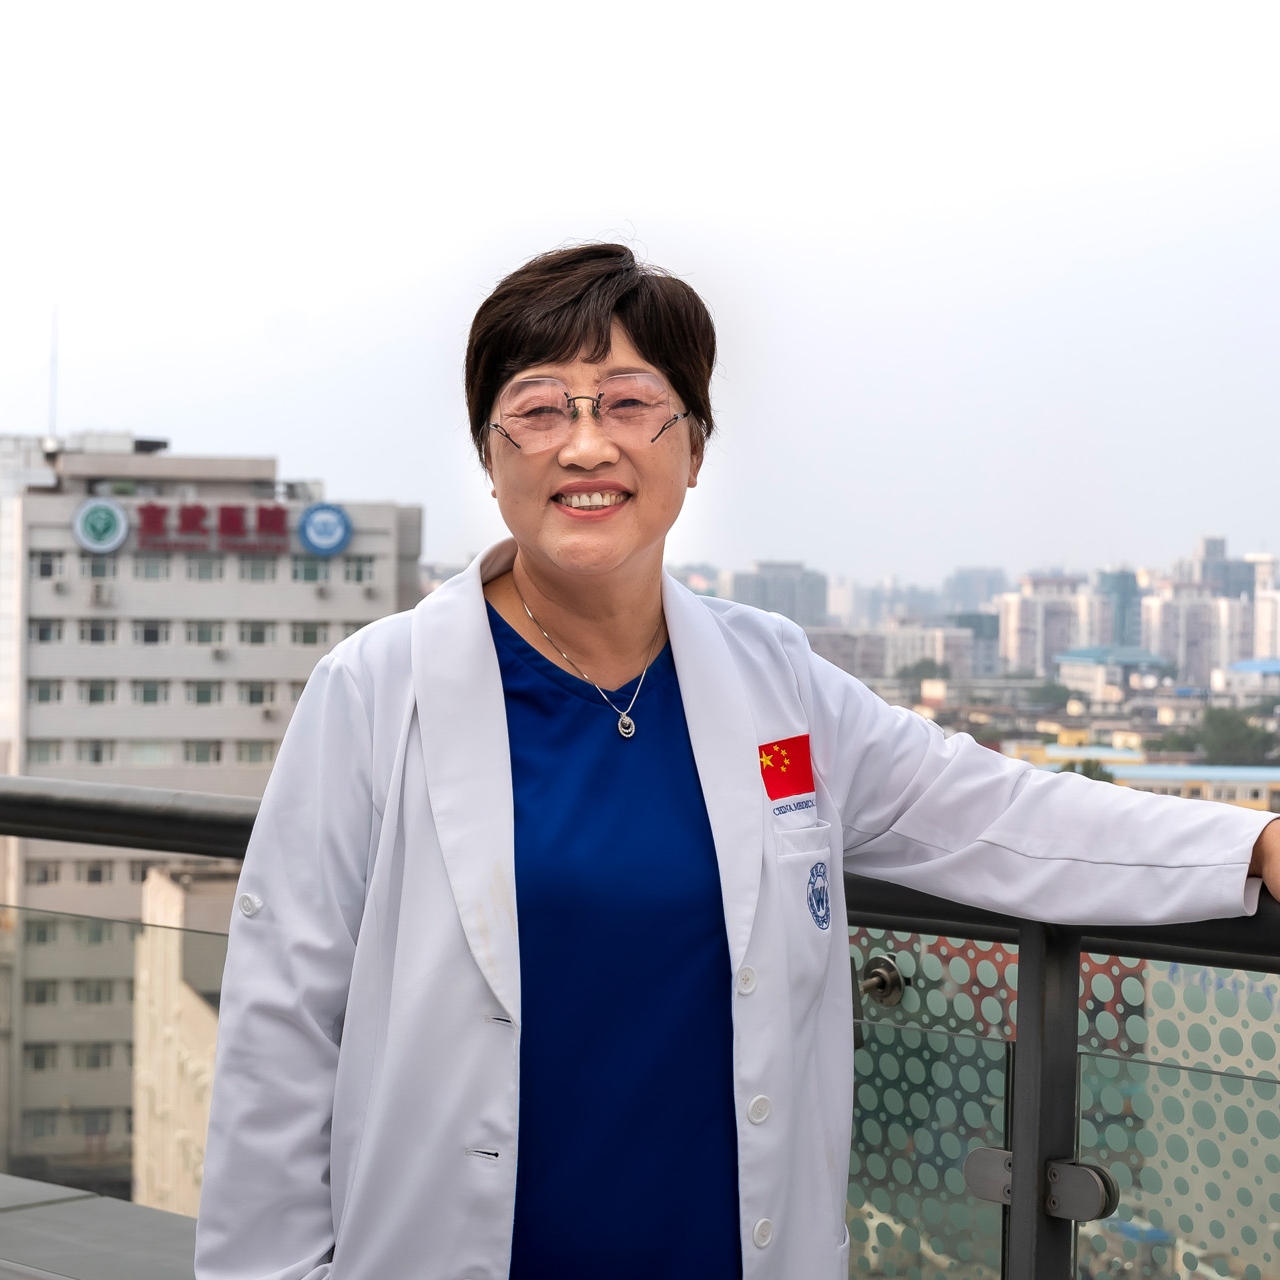 Prof. Ling Feng, neurosurgeon and Deputy Director of China INI in Beijing